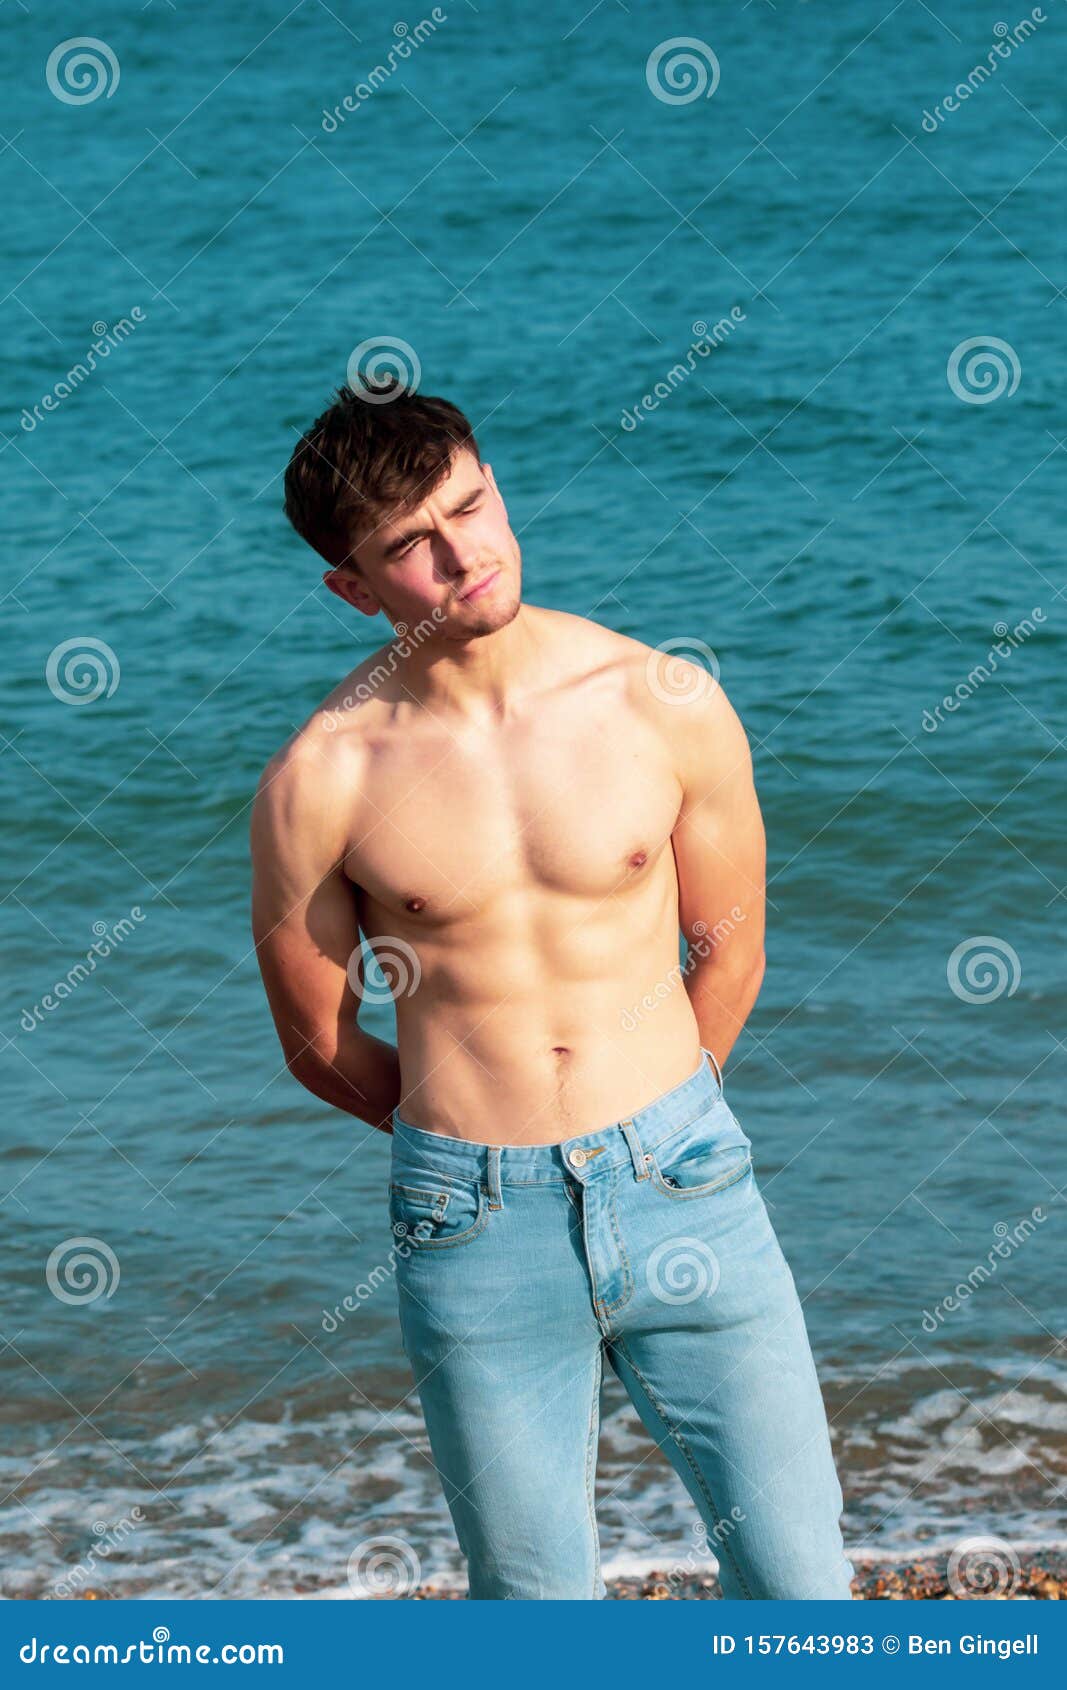 Shirtless on a beach stock image. Image of person, strong - 157643983